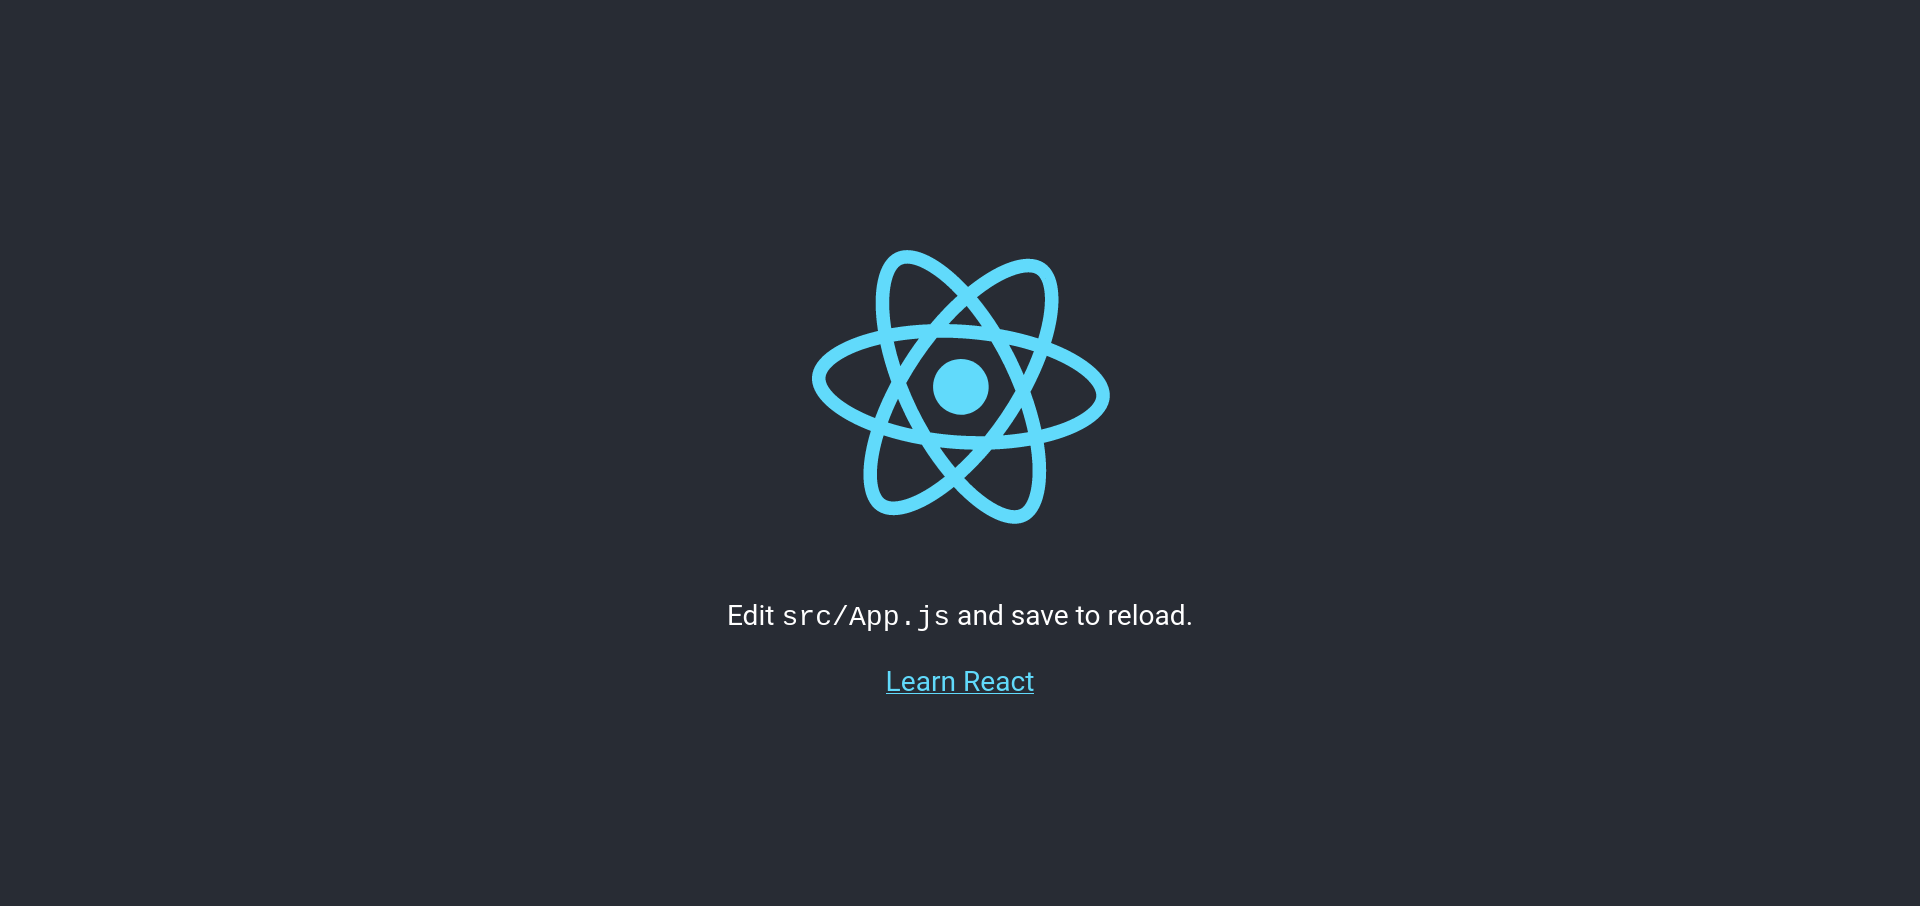 Started React application